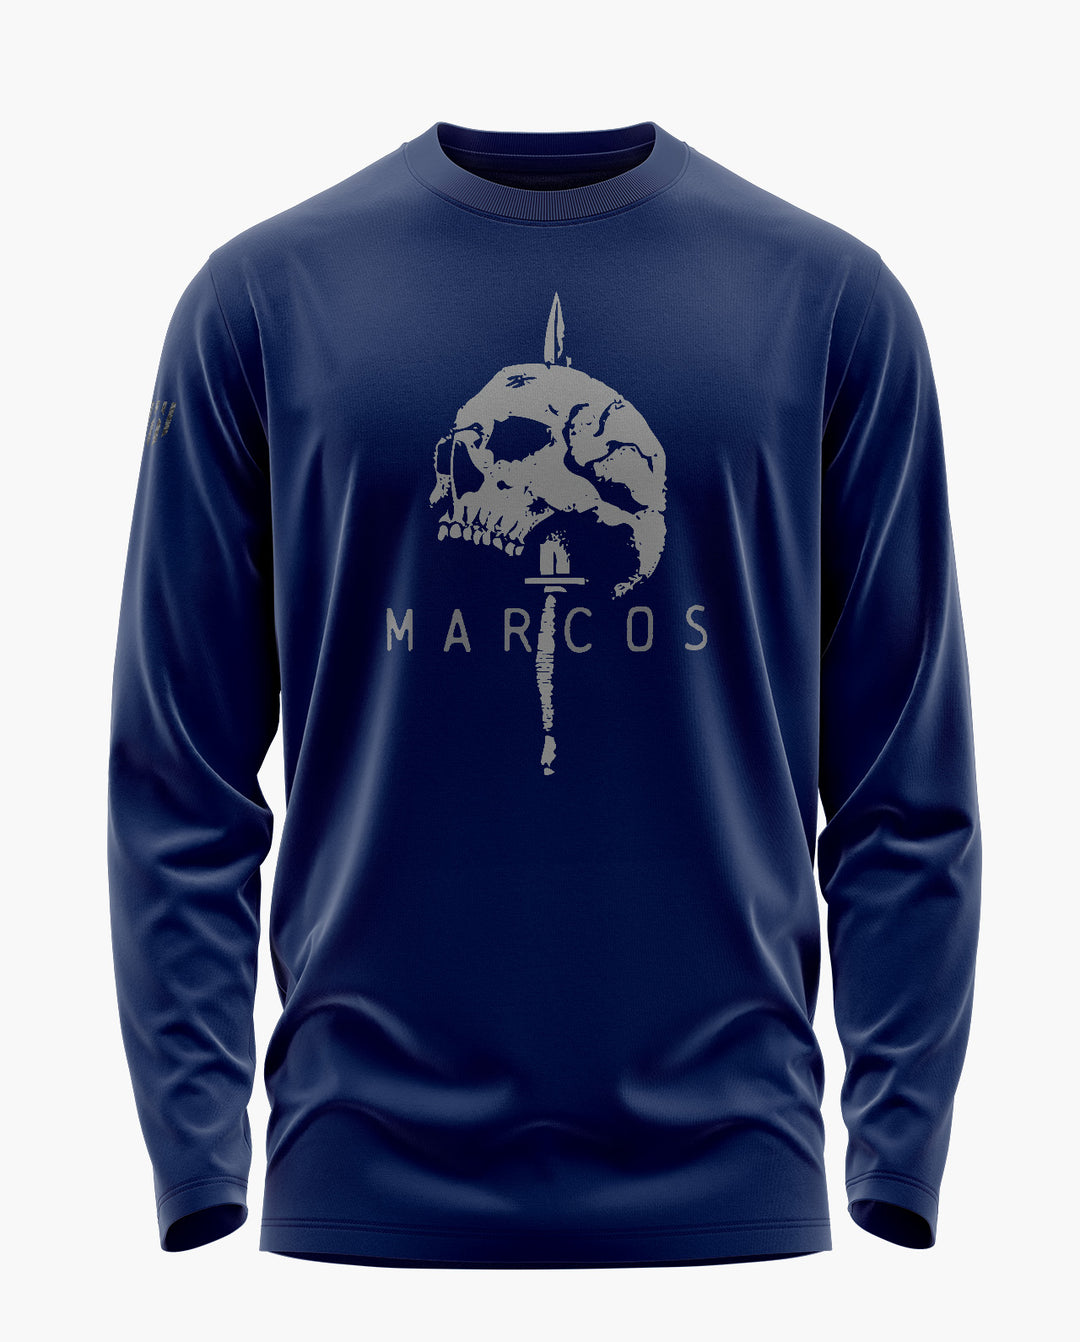 MARCOS SUPREMACY Full Sleeve T-Shirt